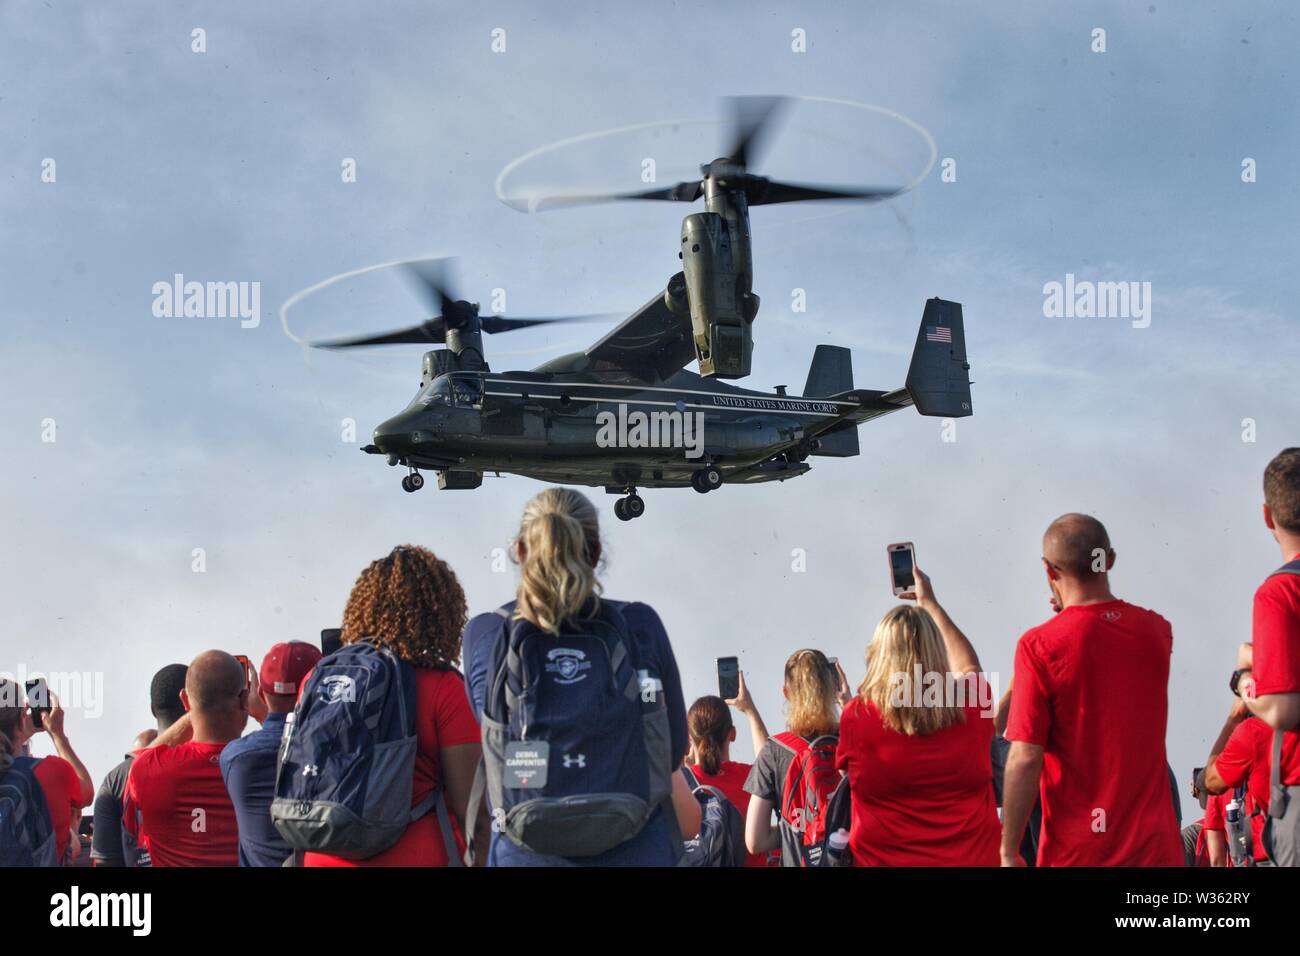 An MV-22 Osprey assigned to Marine Helicopter Squadron One lands at Camp Barrett during the Battles Won Academy at Marine Corps Base Quantico, Virginia, July 12, 2019. The Battles Won Academy is a part of the Marine Corps’ Semper Fidelis All-American Program, which recognizes young men and women who excel in athletics, but have also shown themselves to be leaders in the classroom and in their communities. Nearly 100 high school student-athletes were selected to attend the academy, which runs through July 14 and focuses on developing their self-confidence, discipline, teamwork, and honing the f Stock Photo